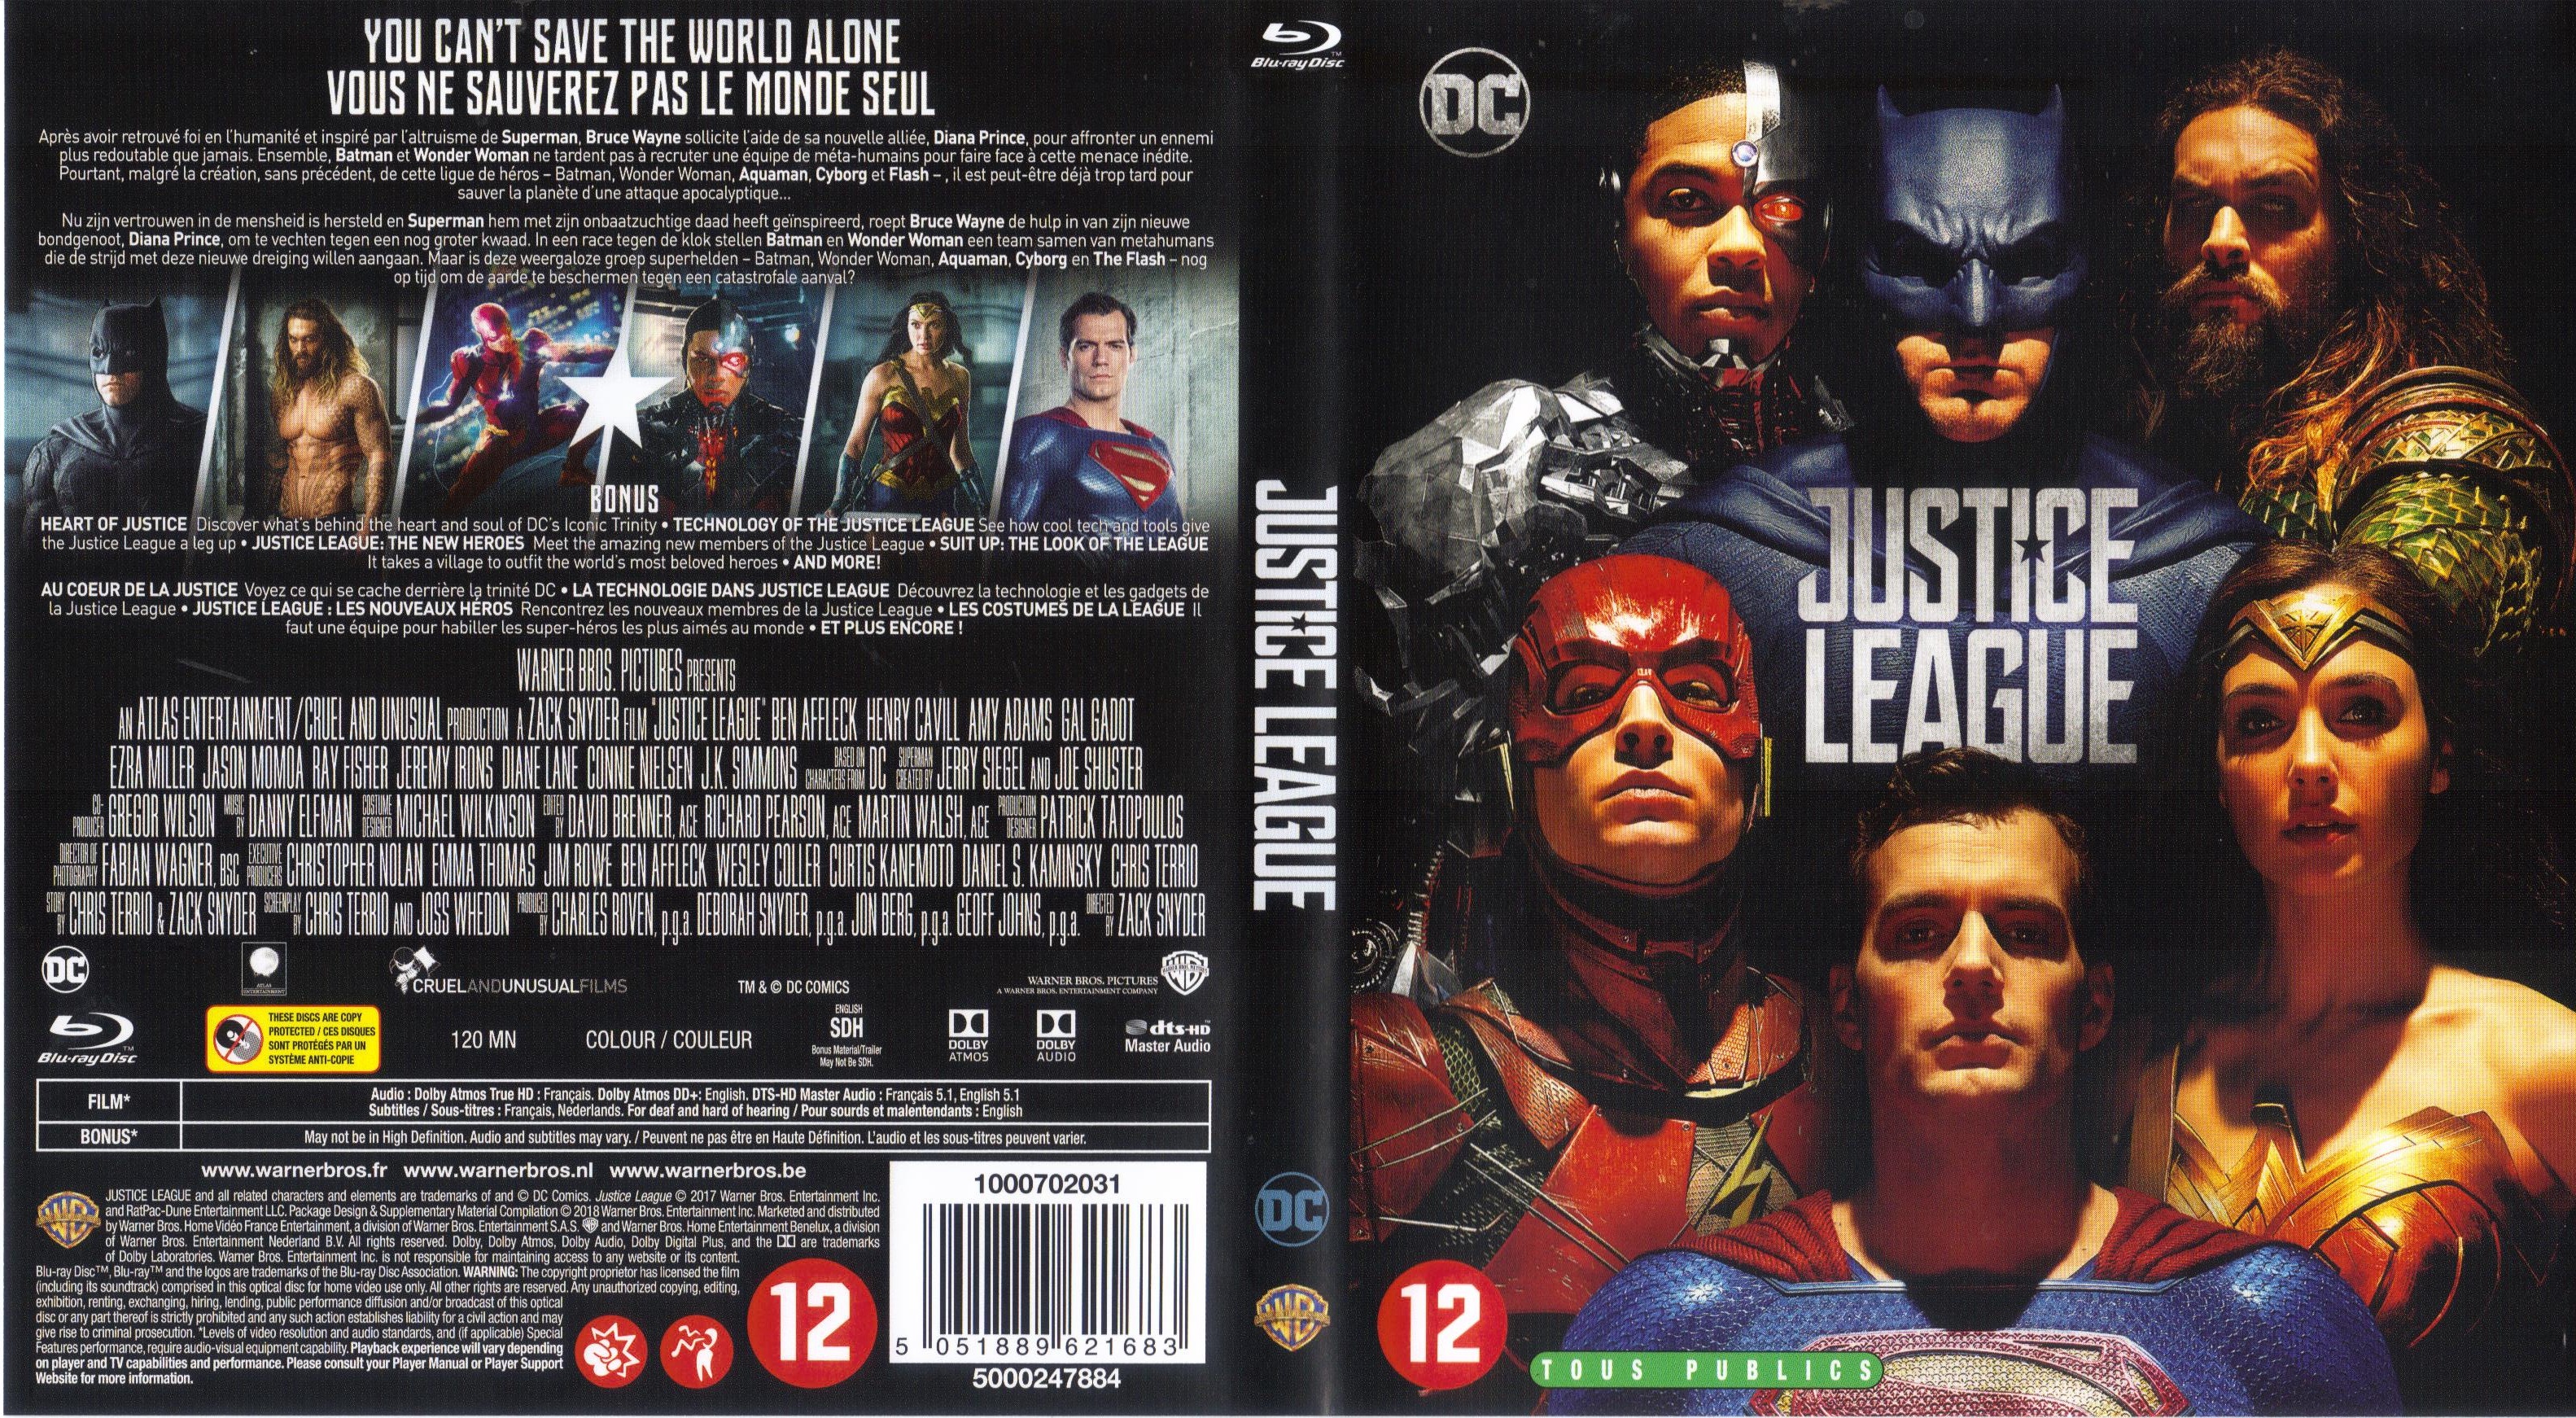 Jaquette DVD Justice League (BLU-RAY) v2